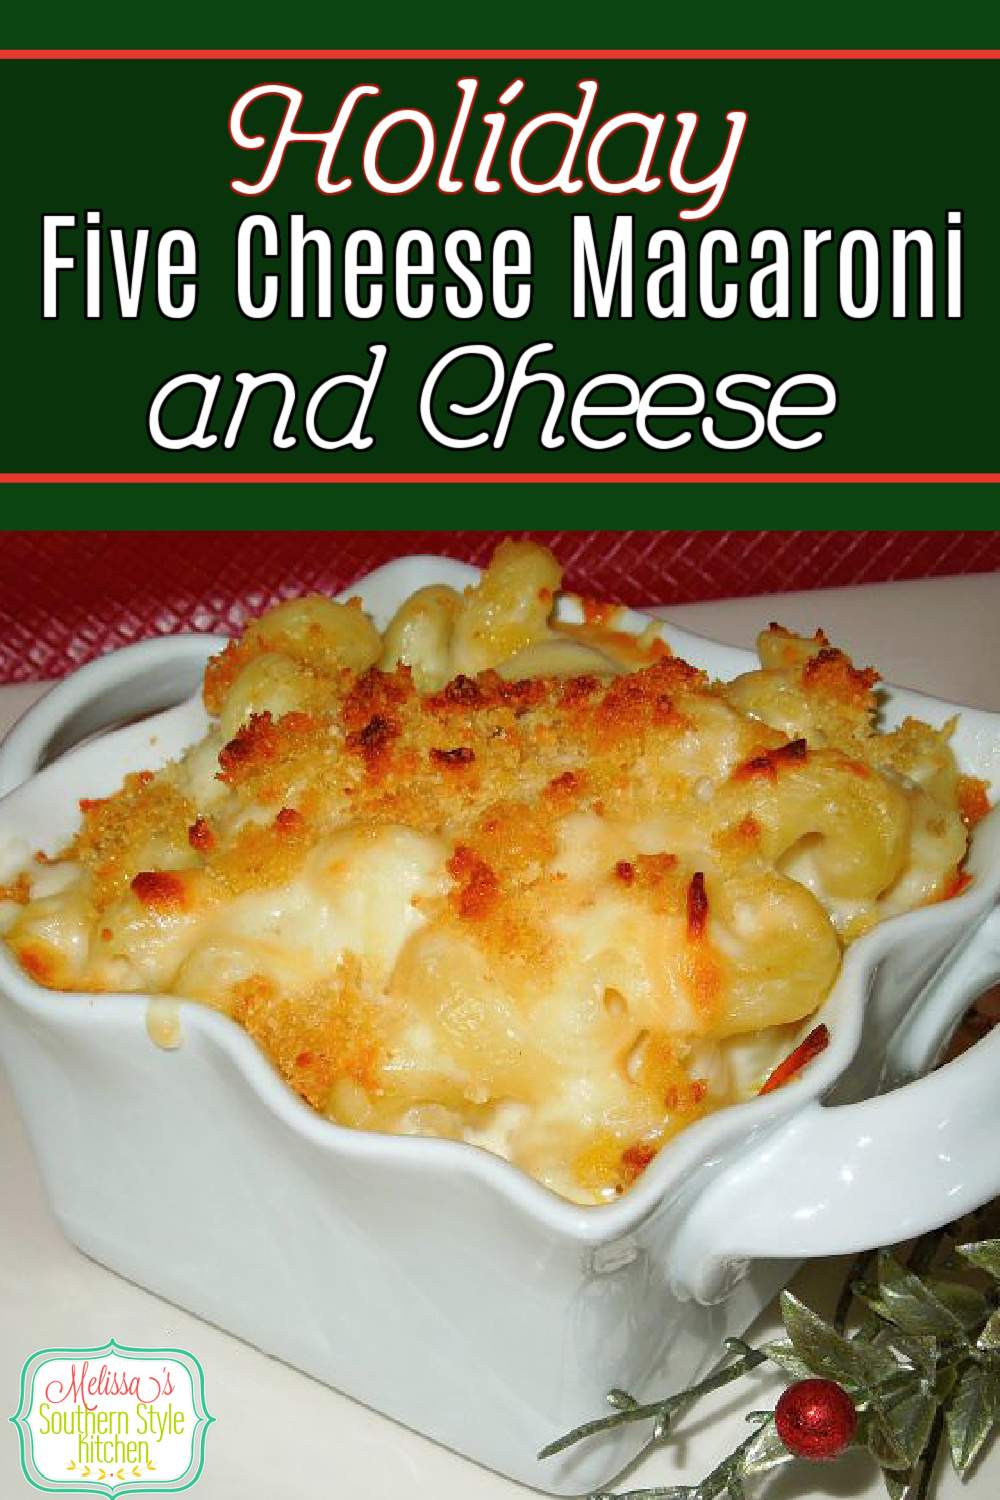 This 5 Cheese Holiday Macaroni and Cheese features a delicious blend of cheese that makes it a special dish for a special occasion #macaroniandcheese #macadncheese #cheese #pasta #casseroles #southernrecipes #southernfood #bestmacandcheese #macaroni via @melissasssk